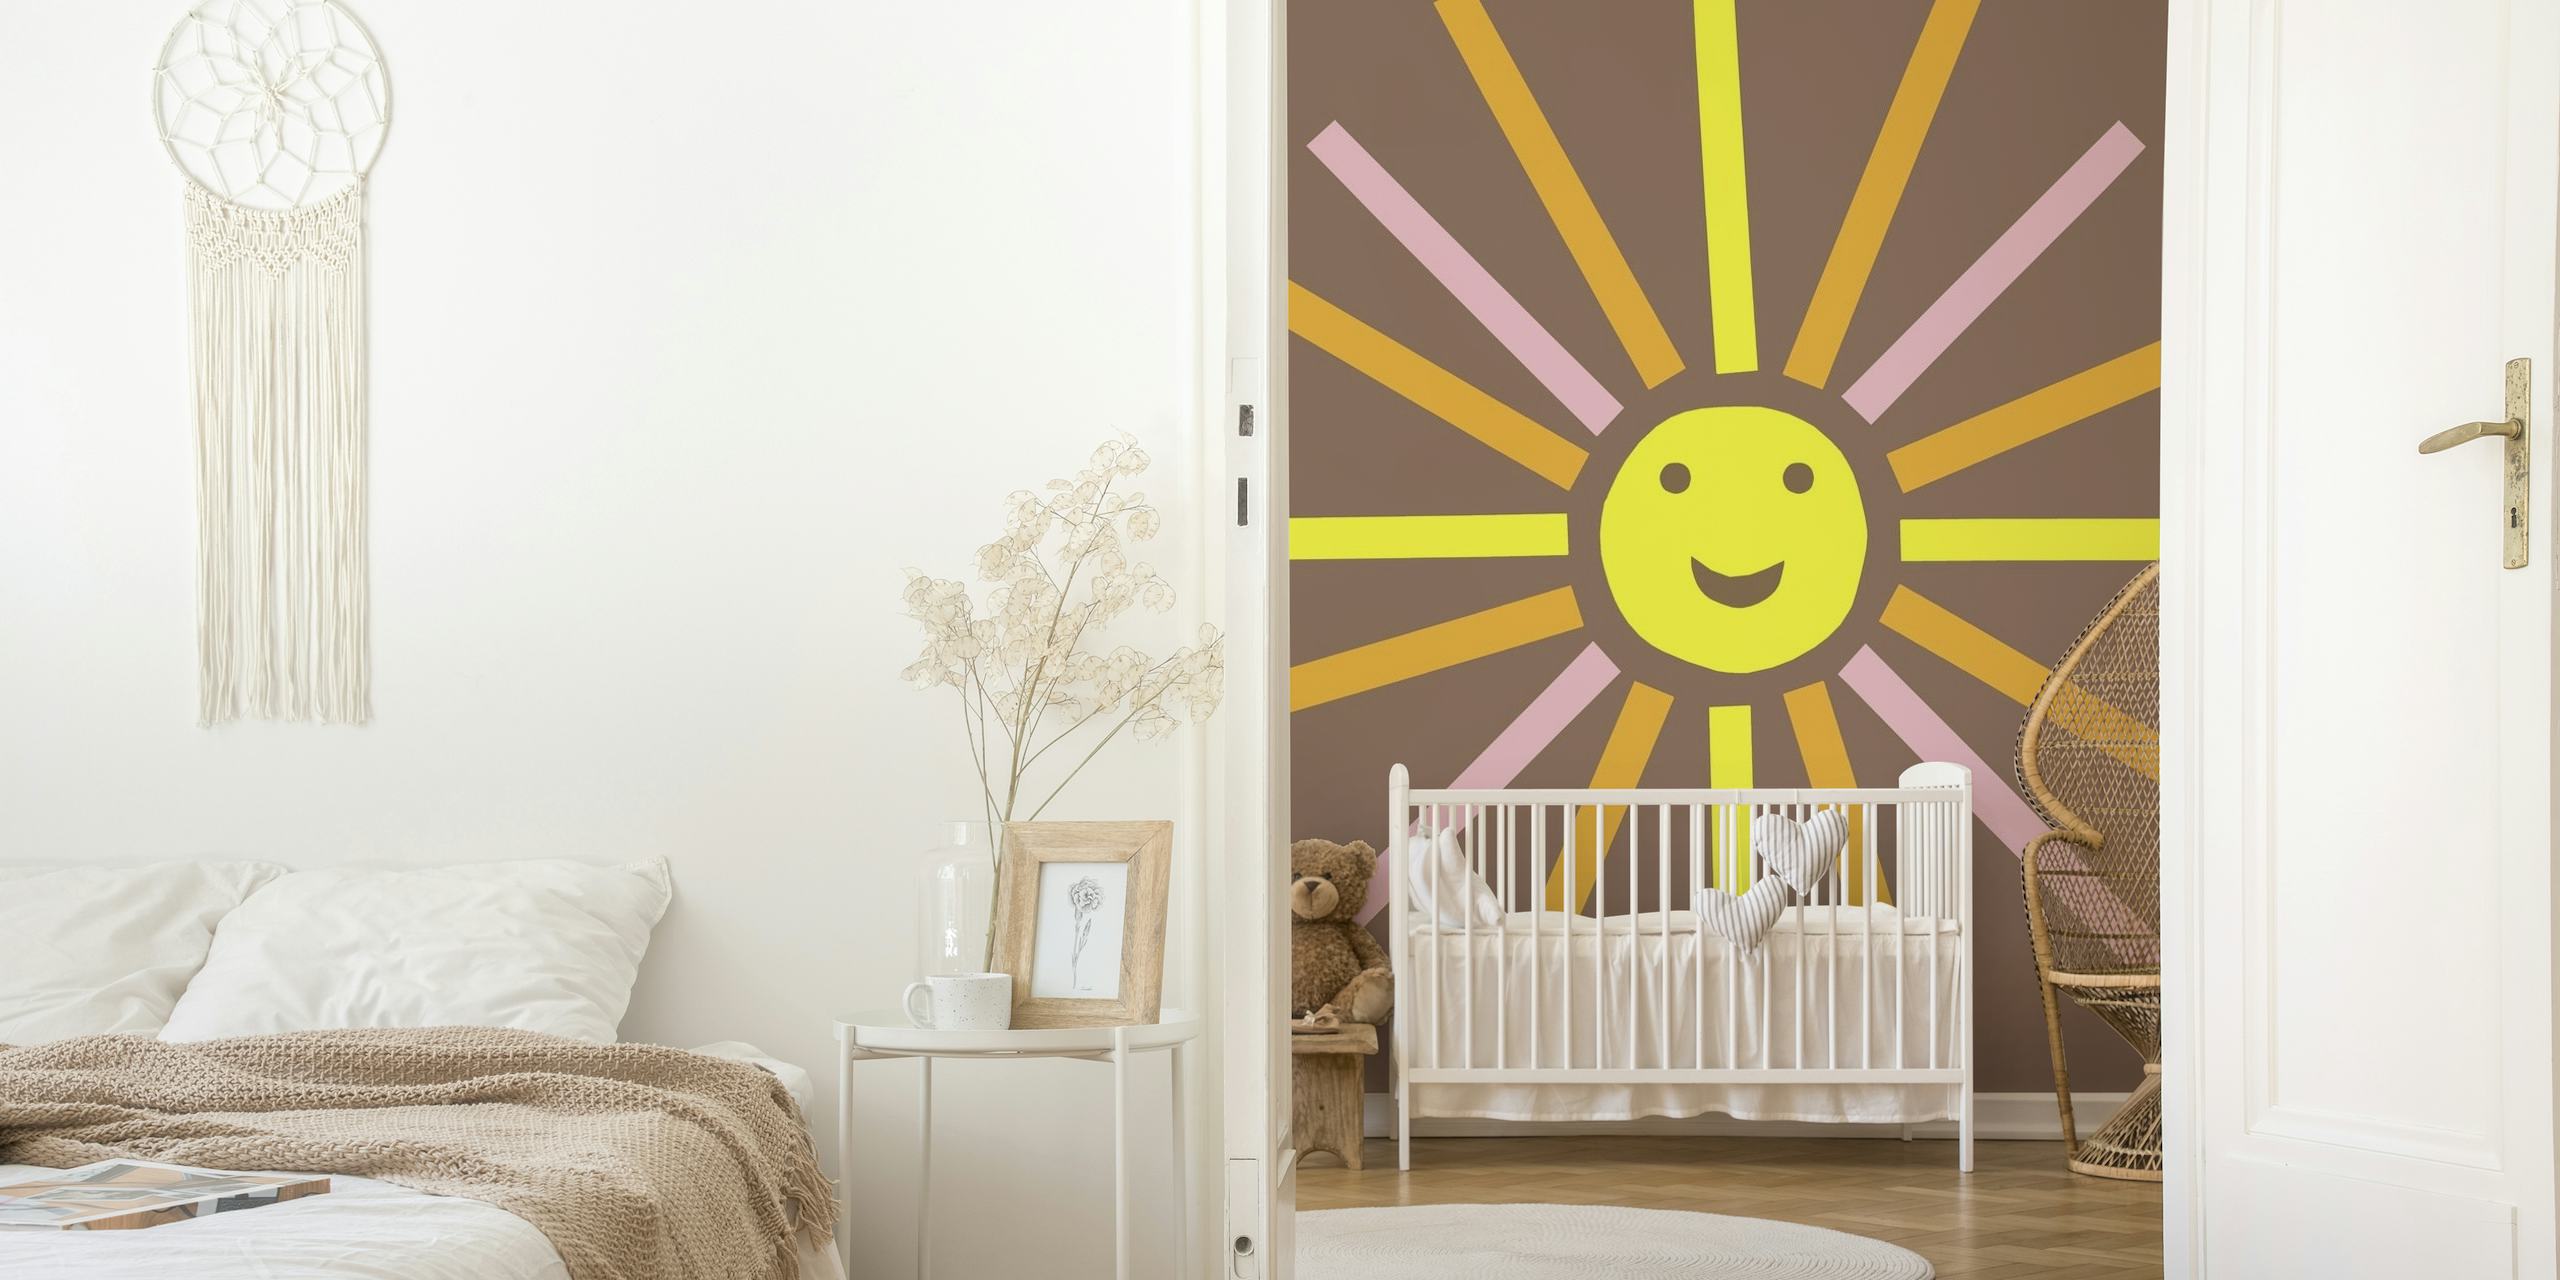 Retro-style smiling sun wall mural with yellow and orange rays on a brown background